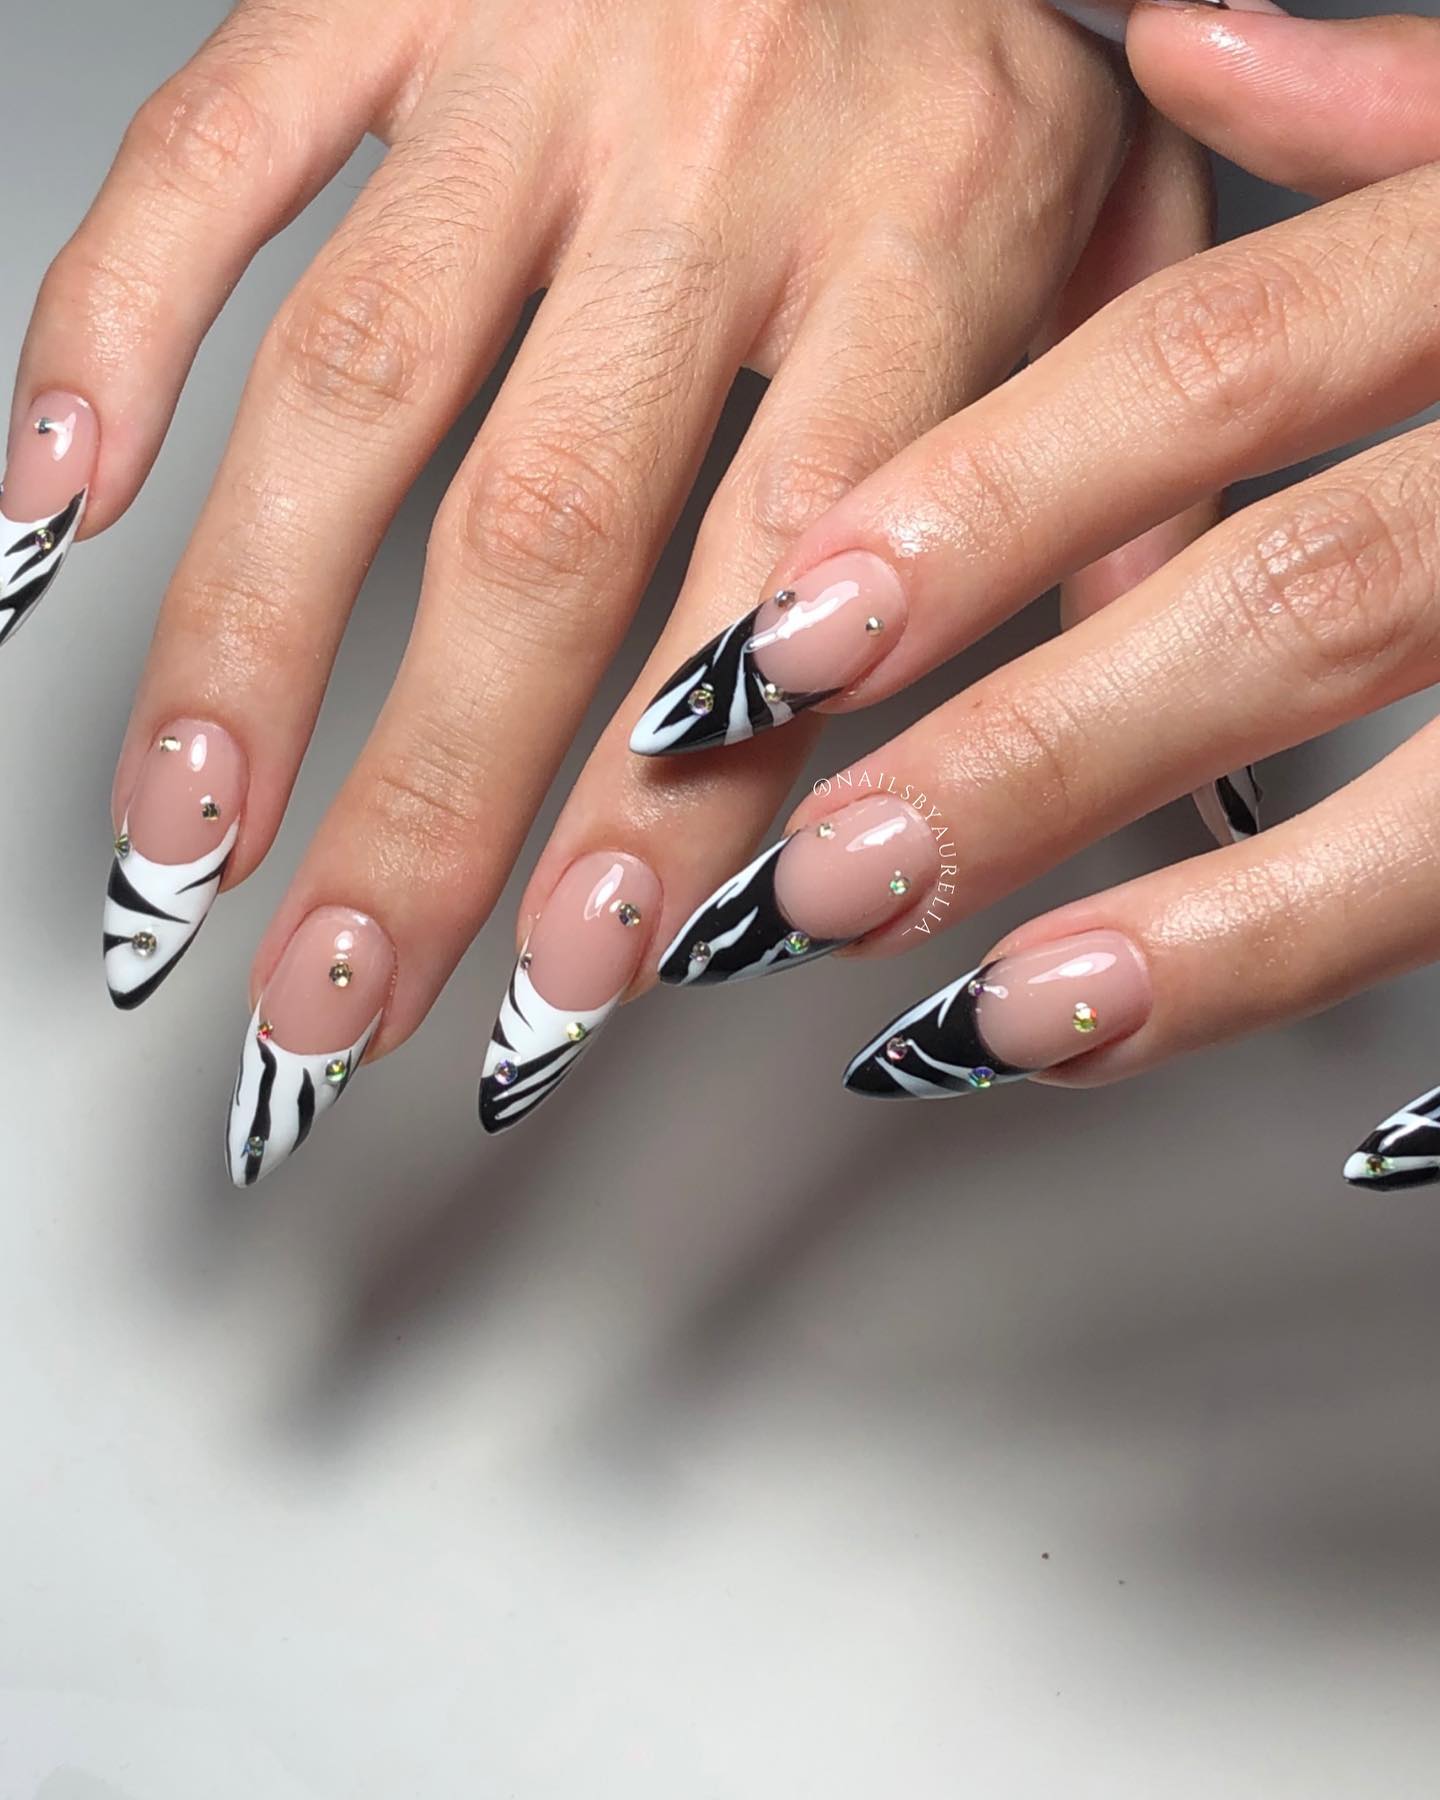 This nail design is great especially for zebra print lovers! On the left hand, black print is in the foreground while on the right hand, it's the opposite.